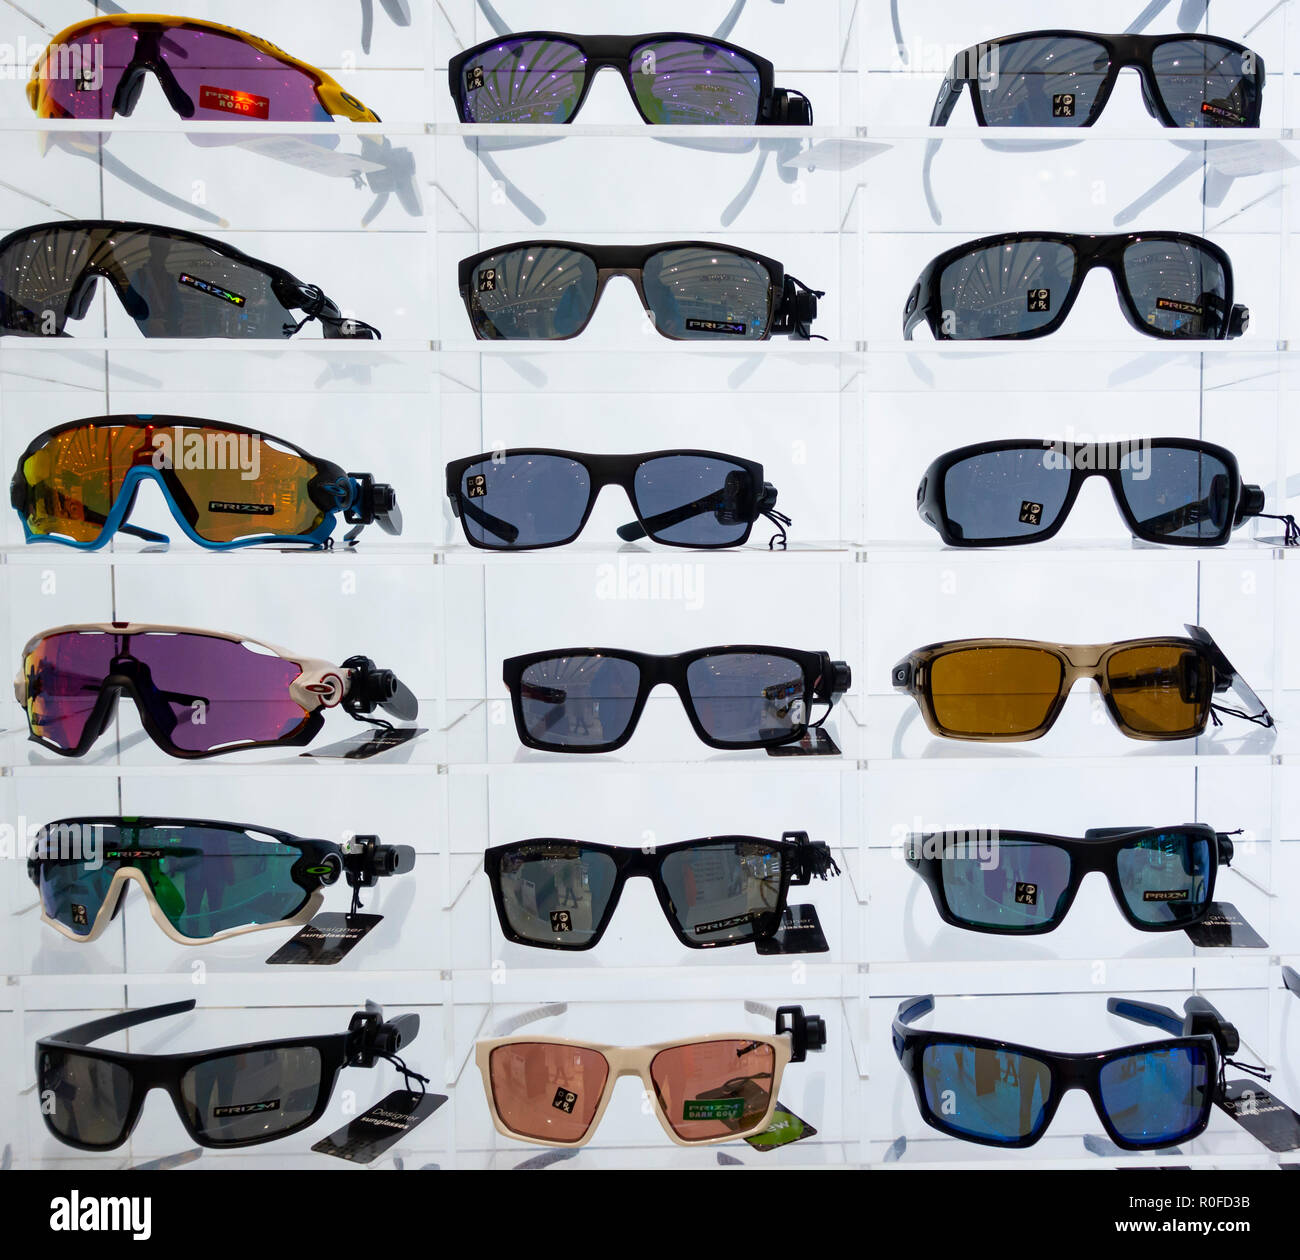 Oakley sunglasses photography images - Alamy